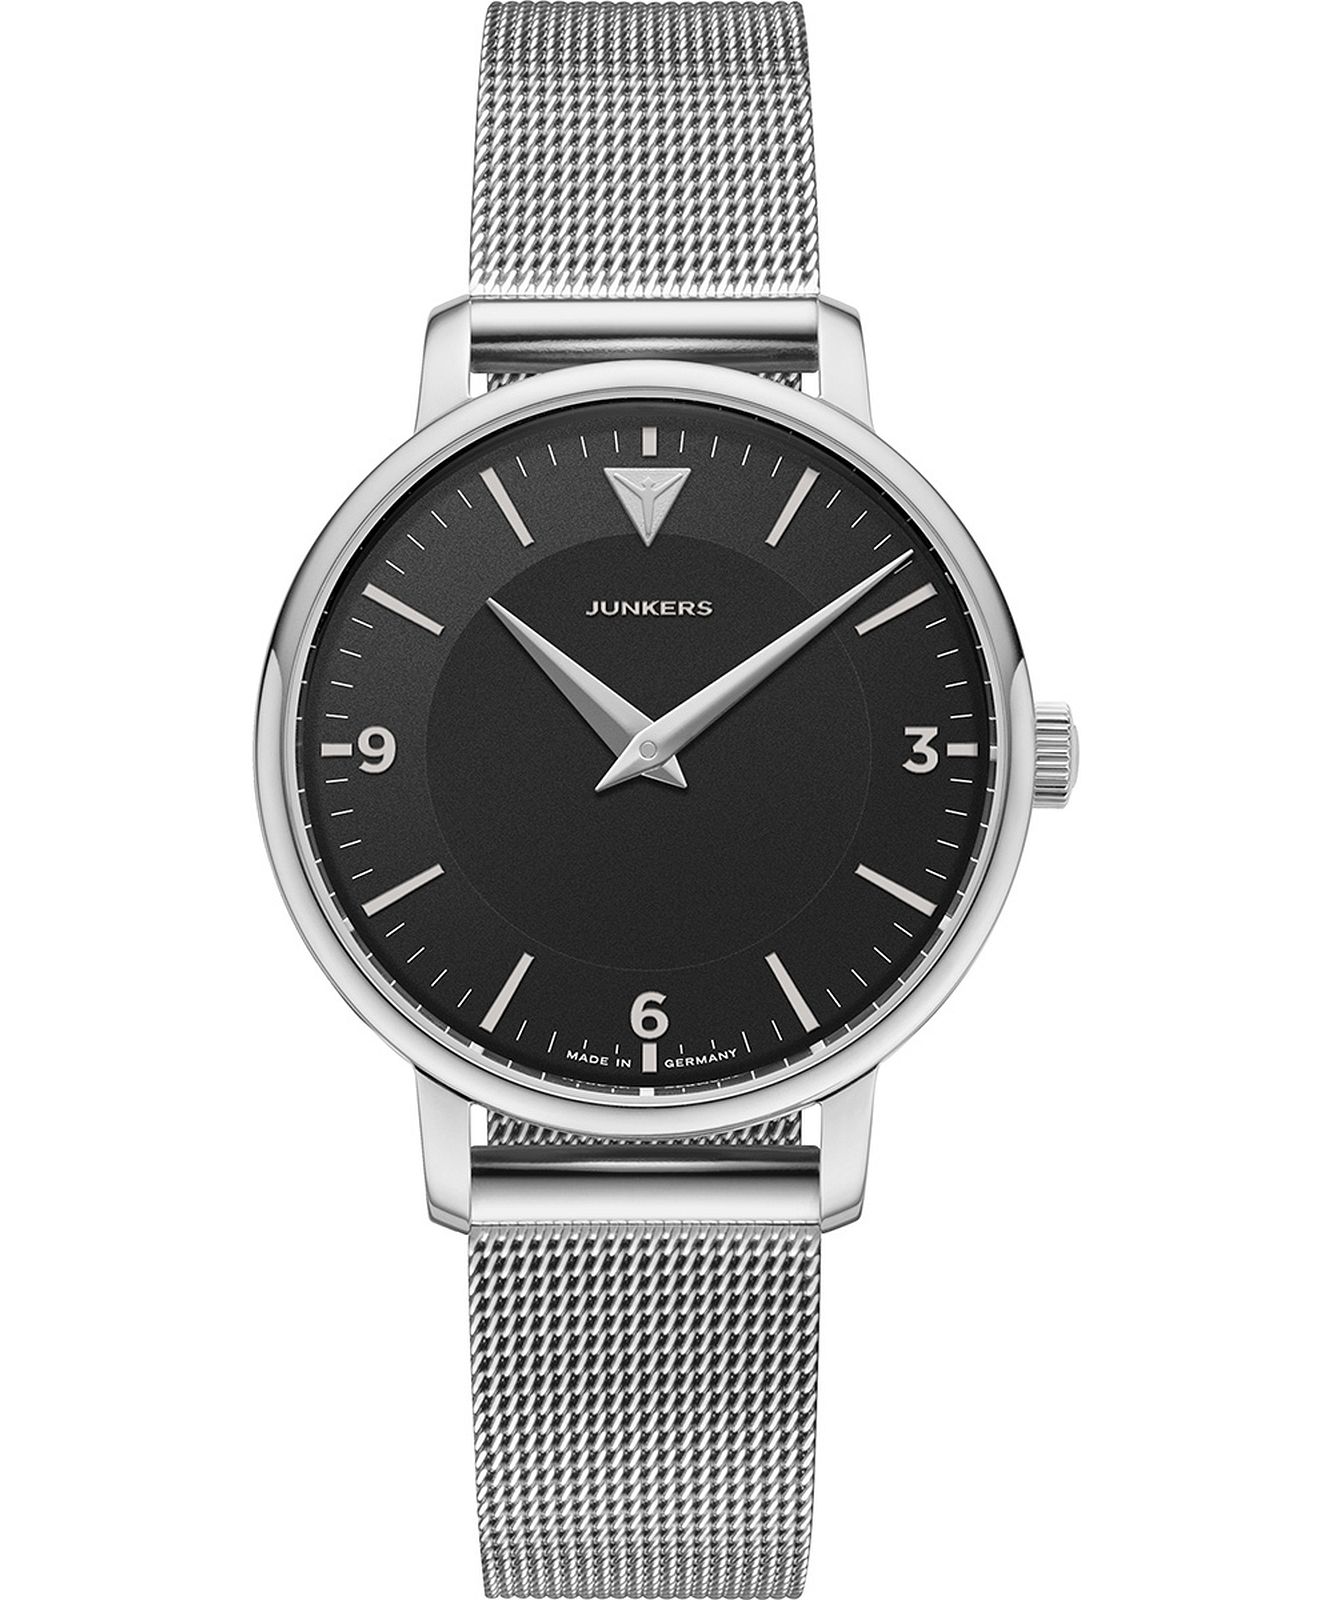 Junkers 9.01.01.02.M - Therese Watch • Watchard.com